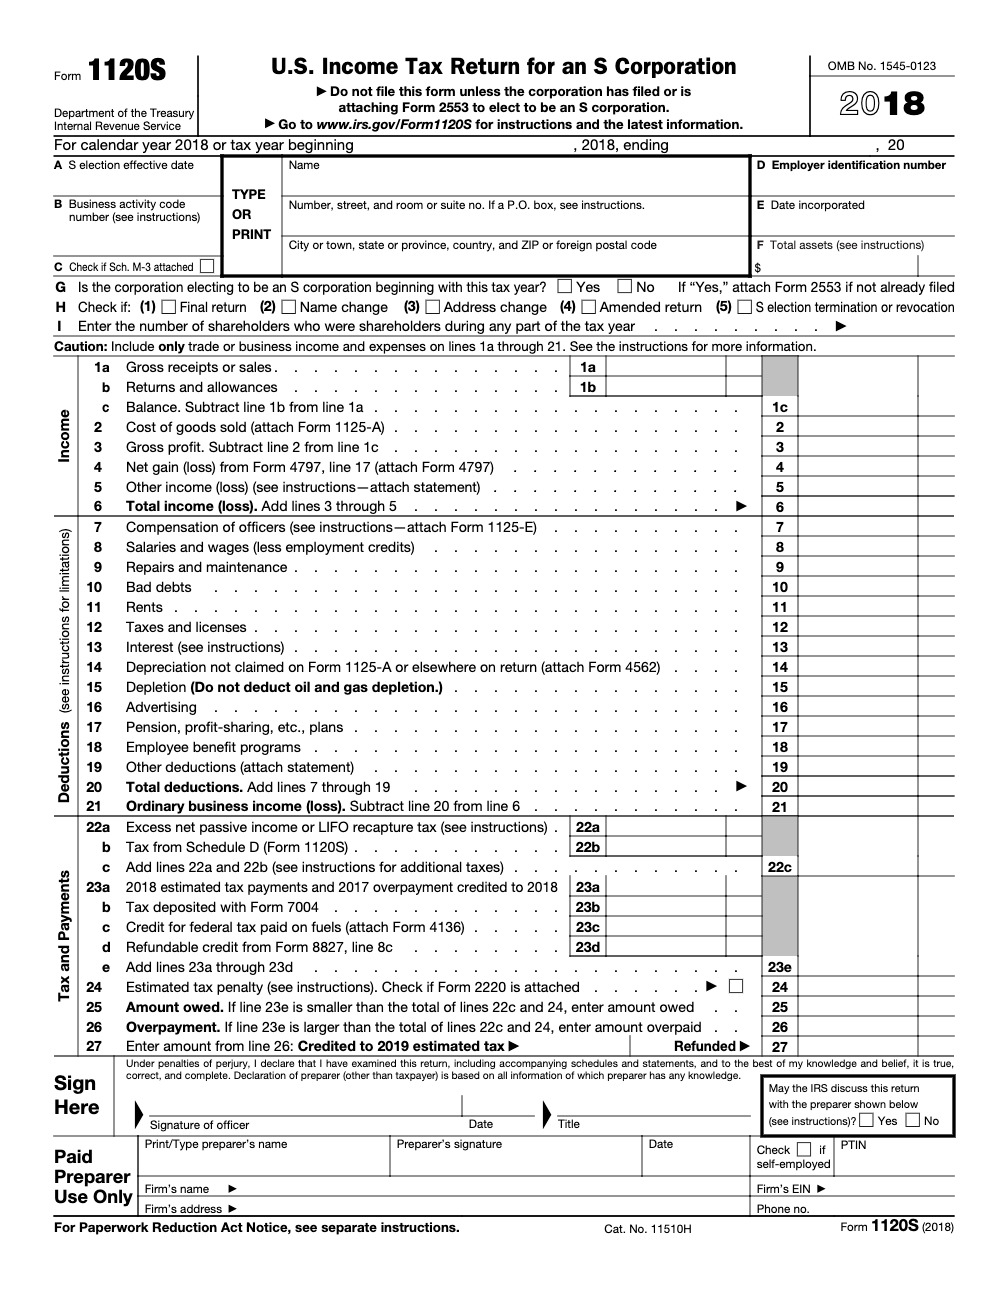 What Is Form 1120S And How Do I File It? | Ask Gusto